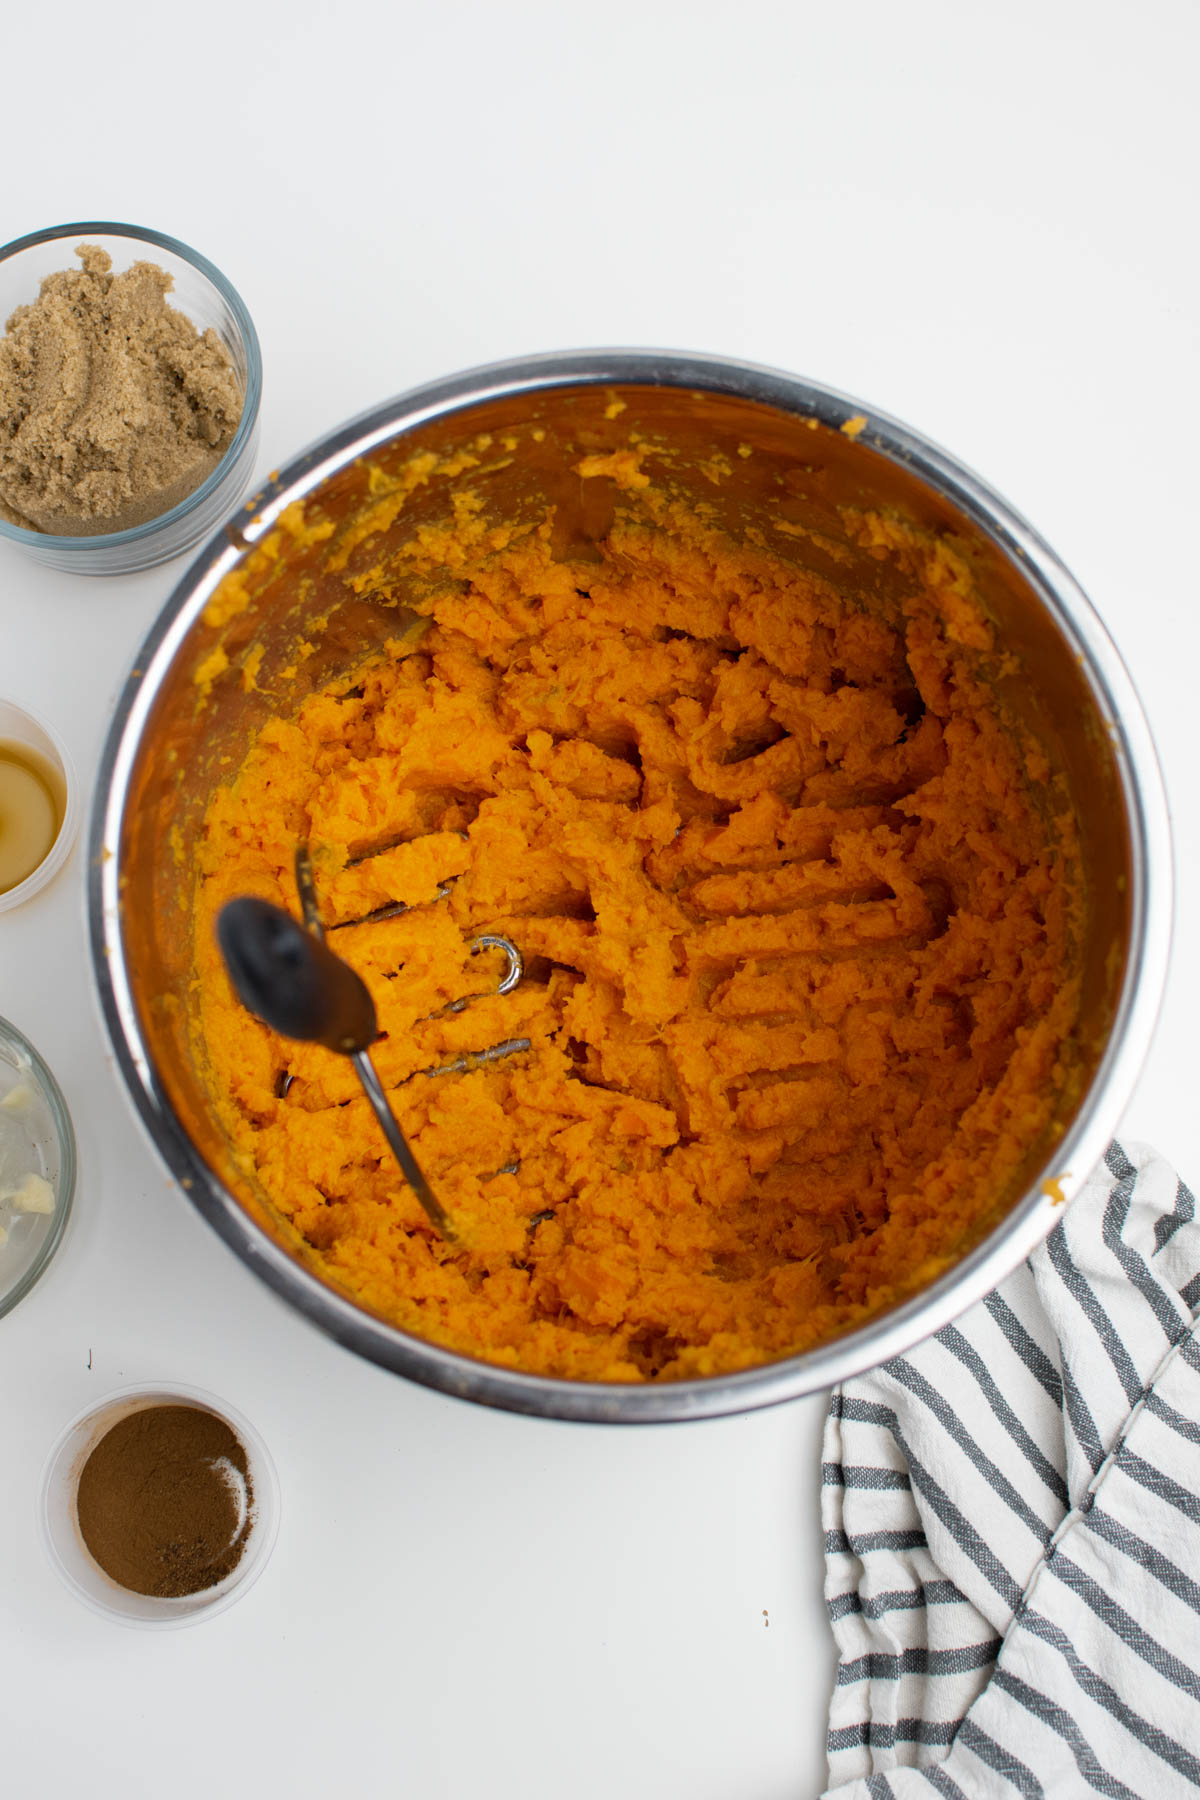 Mashed sweet potatoes in metal bowl with various ingredients also on table.